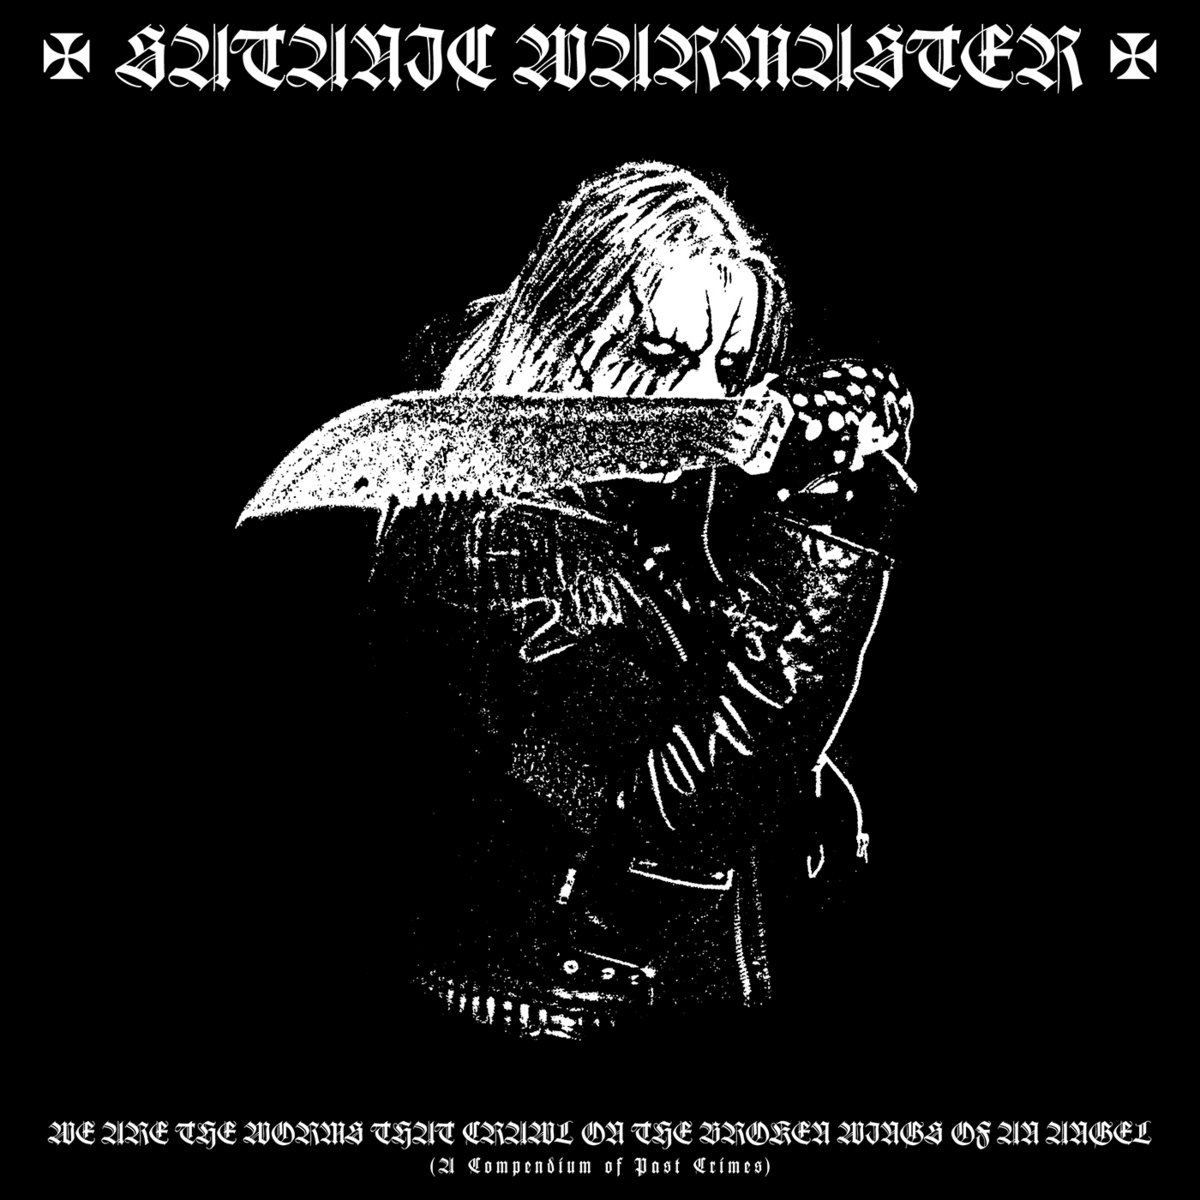 Satanic Warmaster - We Are The Worms That Crawl...